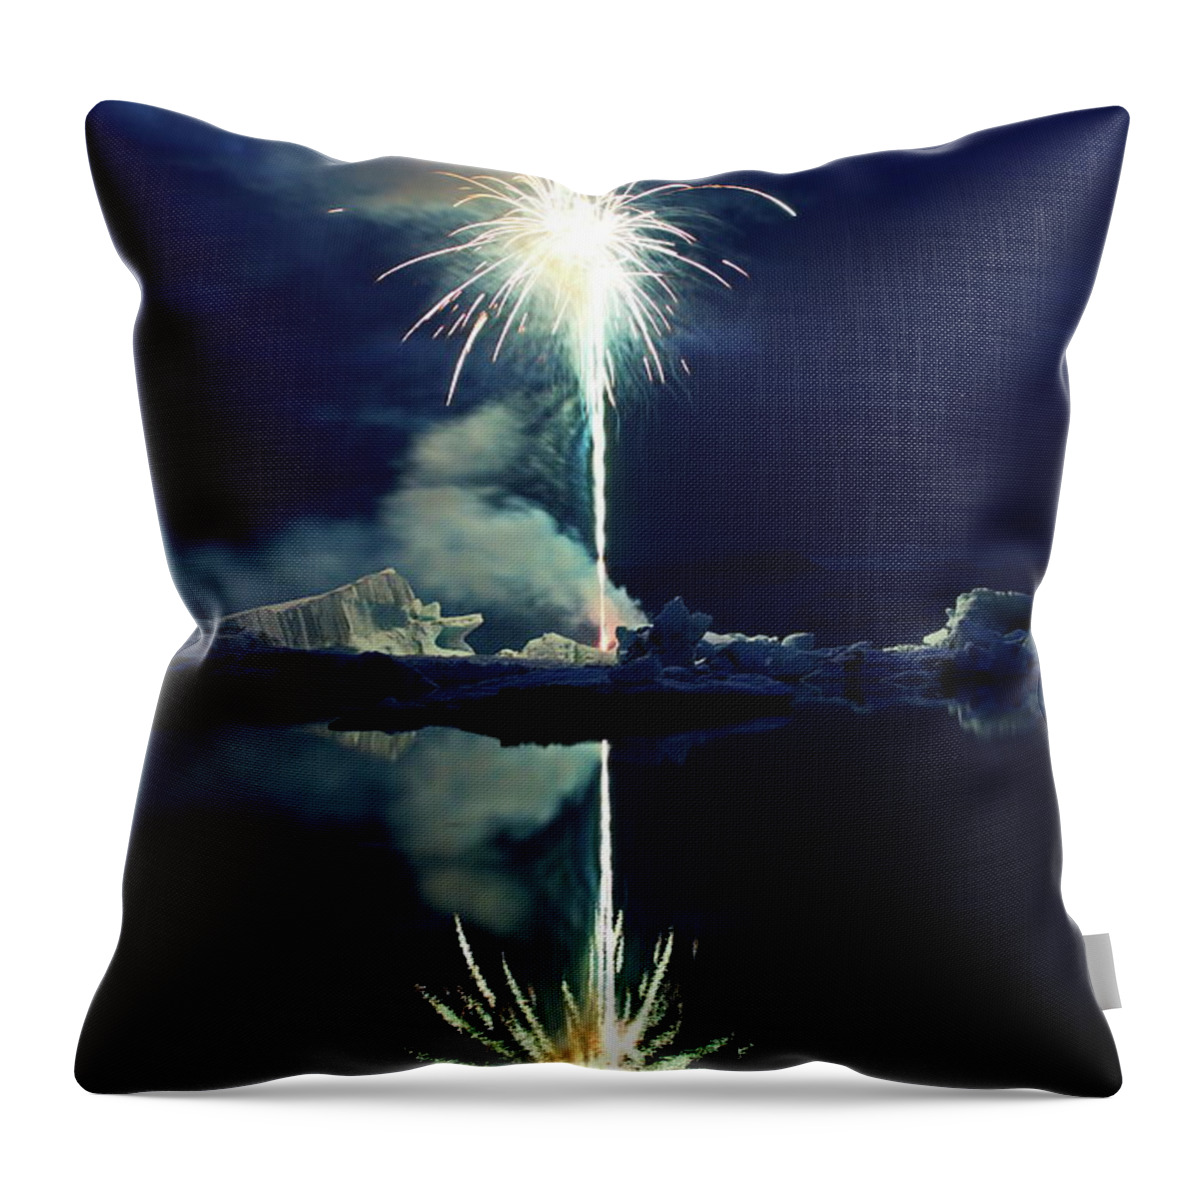 Fireworks Throw Pillow featuring the photograph The sparkler by Christopher Mathews